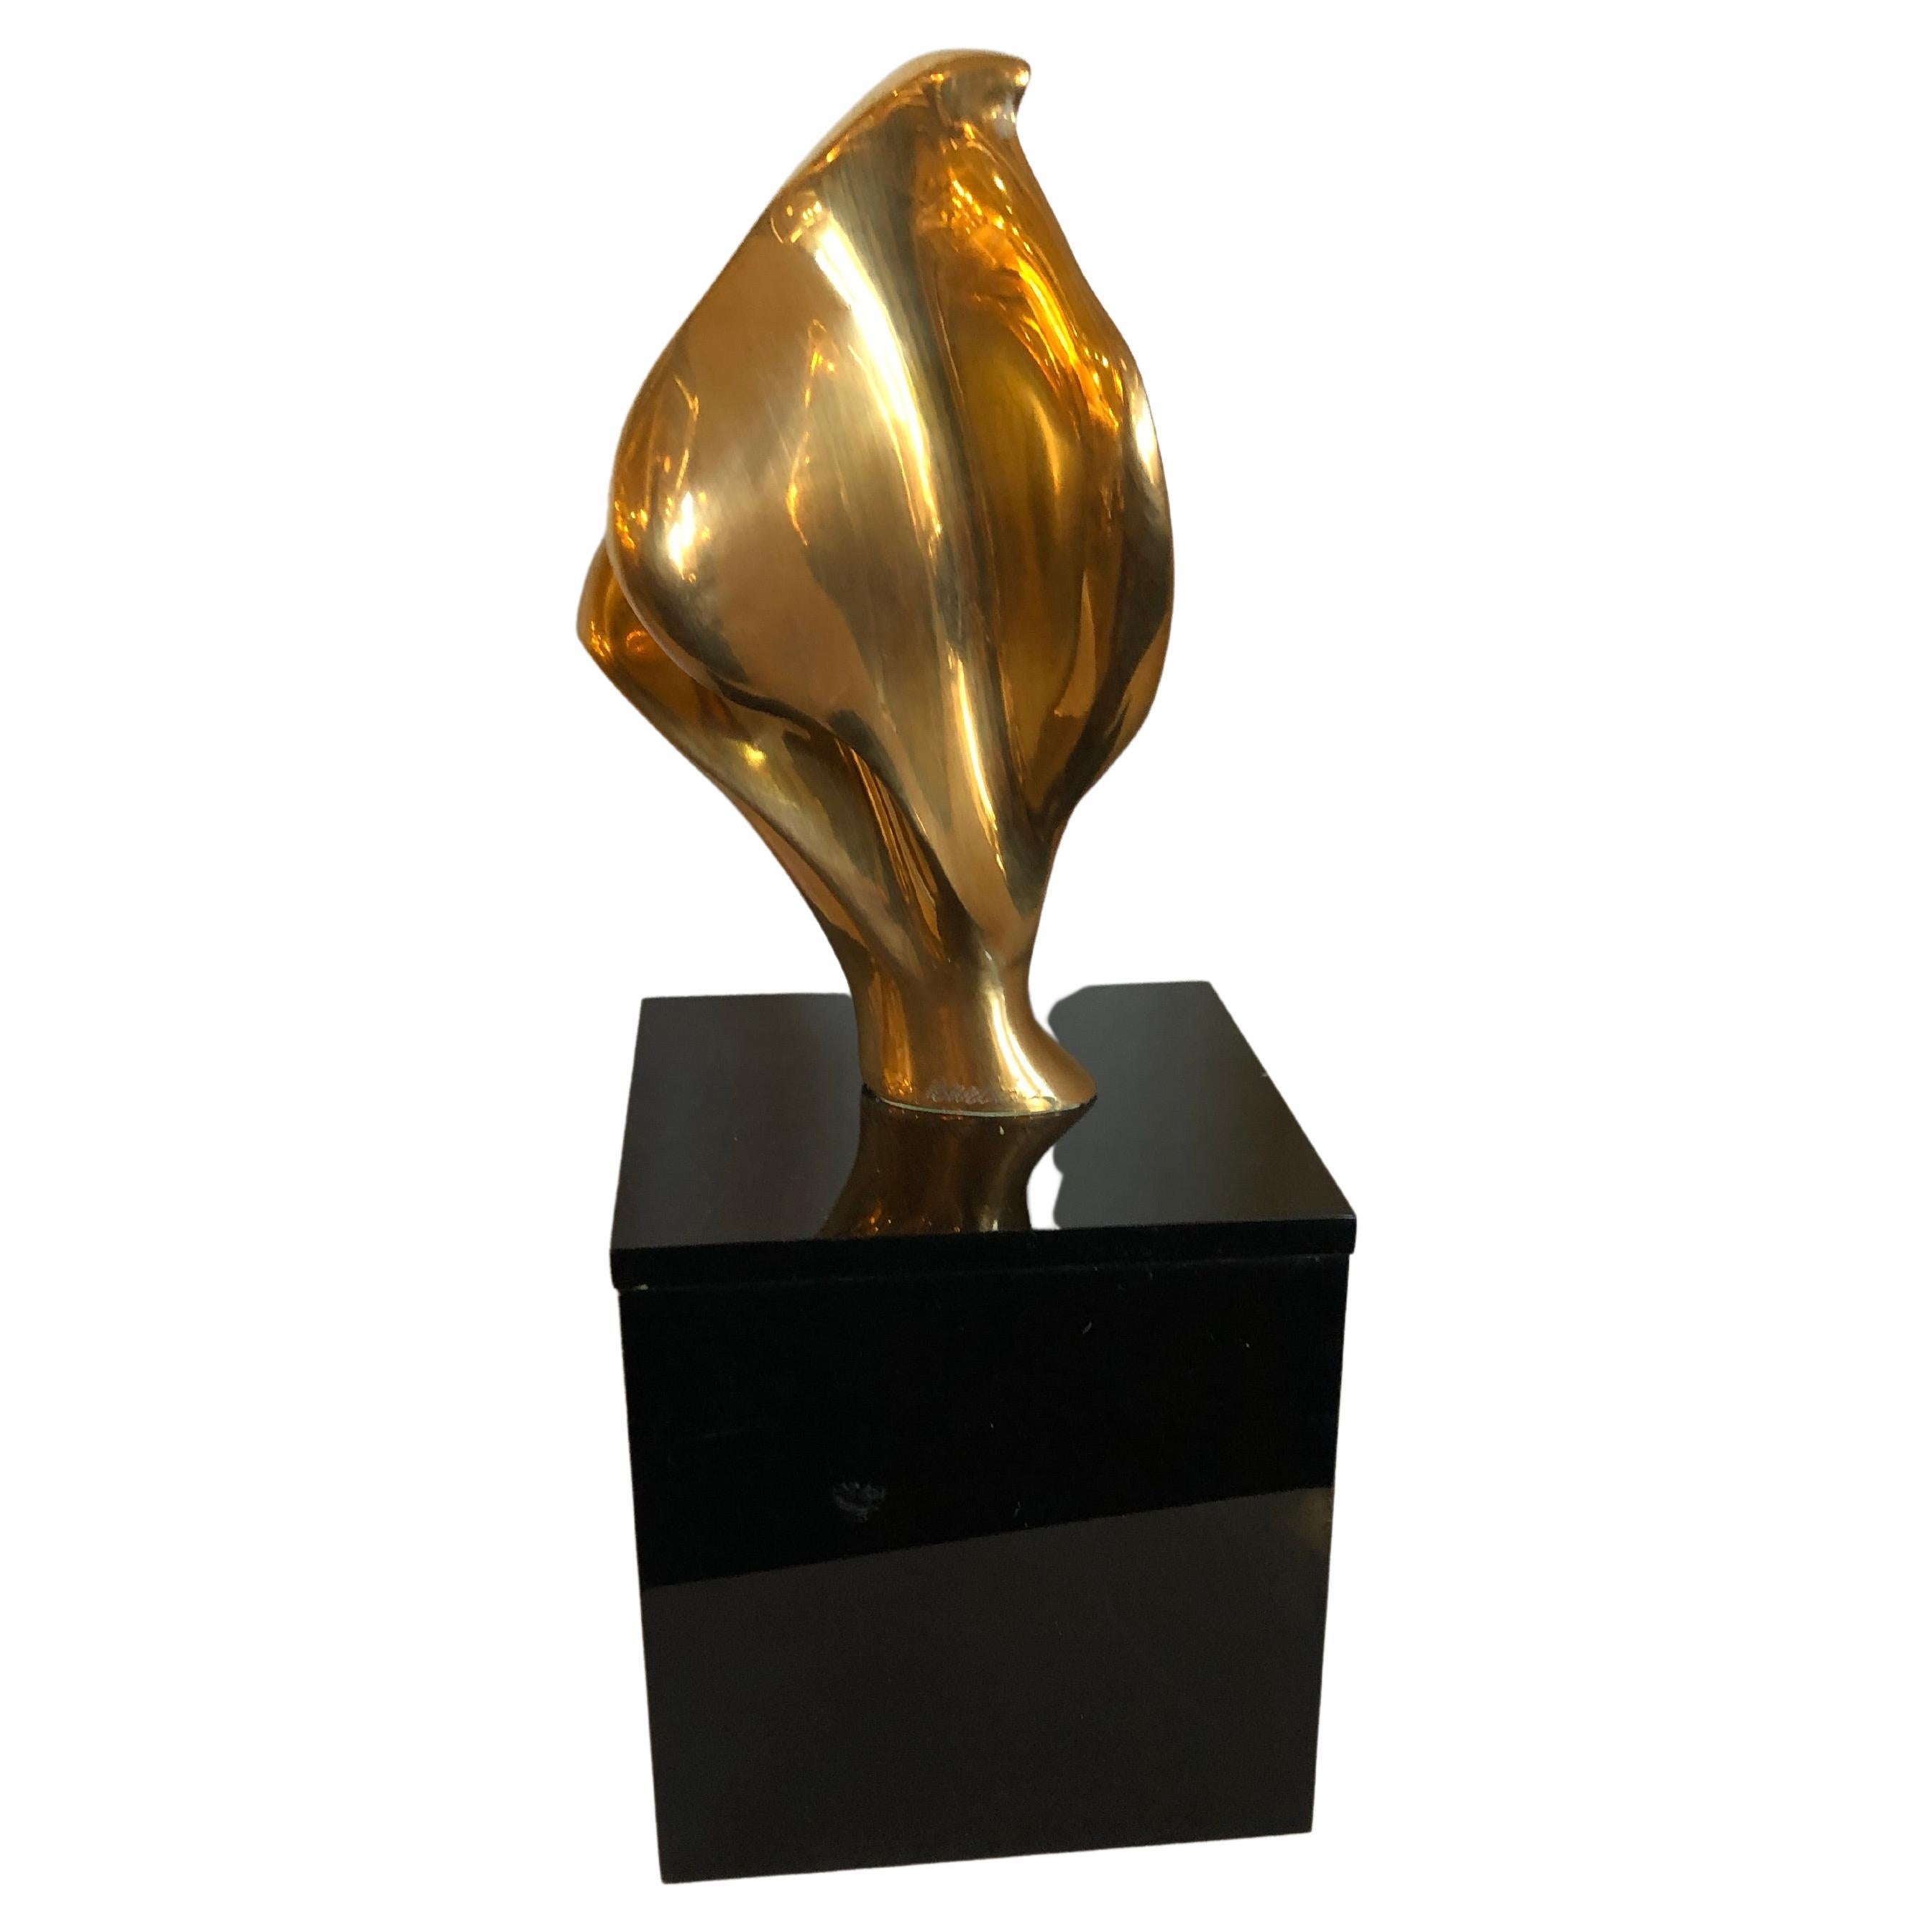 Polished Bronze Biomorphic Sculpture by Alfred Burlini